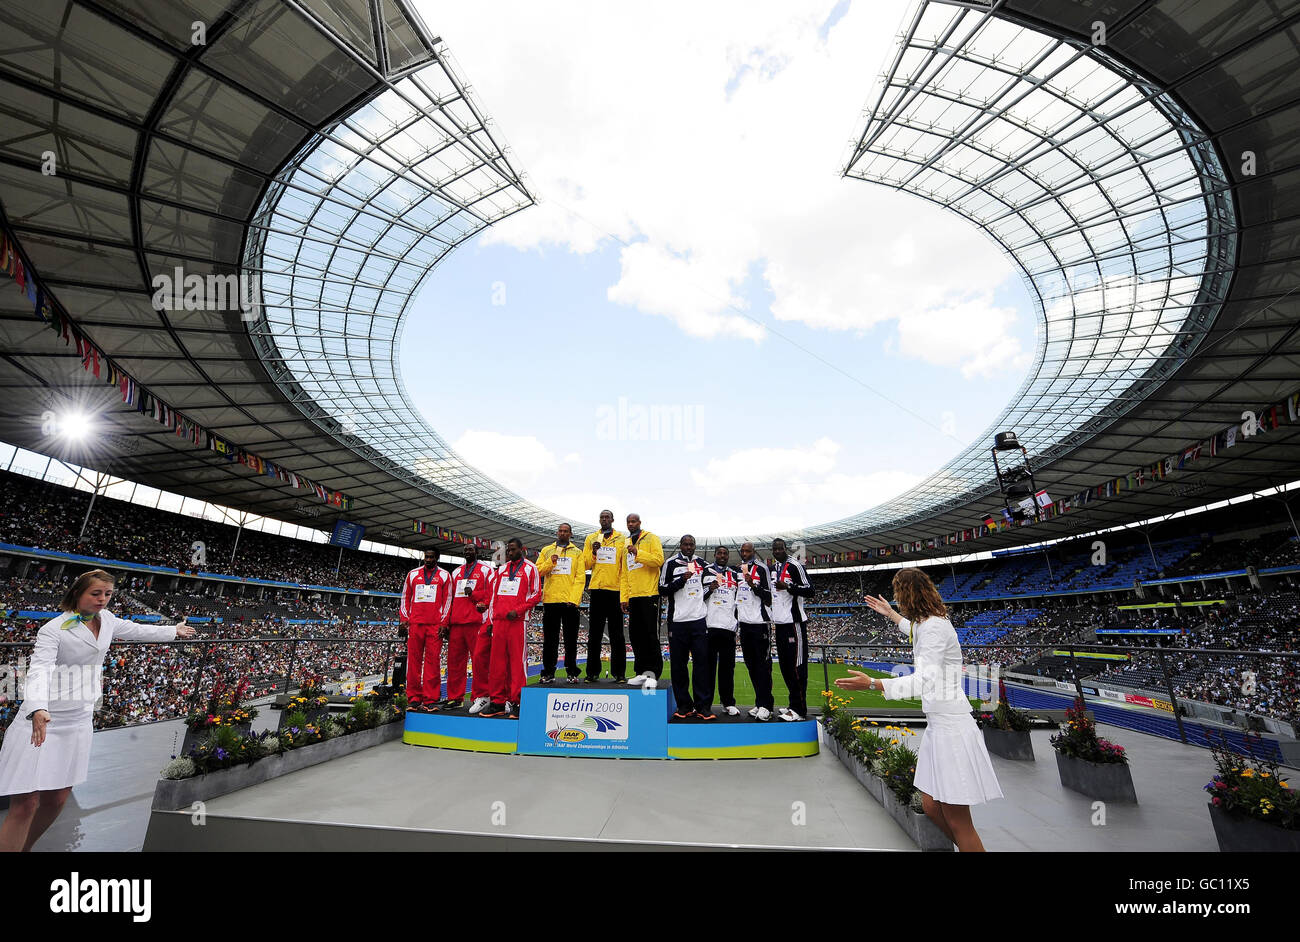 Usain Bolt stands in the middle as the Jamaican relay team collect their Gold Medals from the 4x100 men's relay in which Great Britain (right) took the Bronze medal during the IAAF World Championships at the Olympiastadion, Berlin. Stock Photo